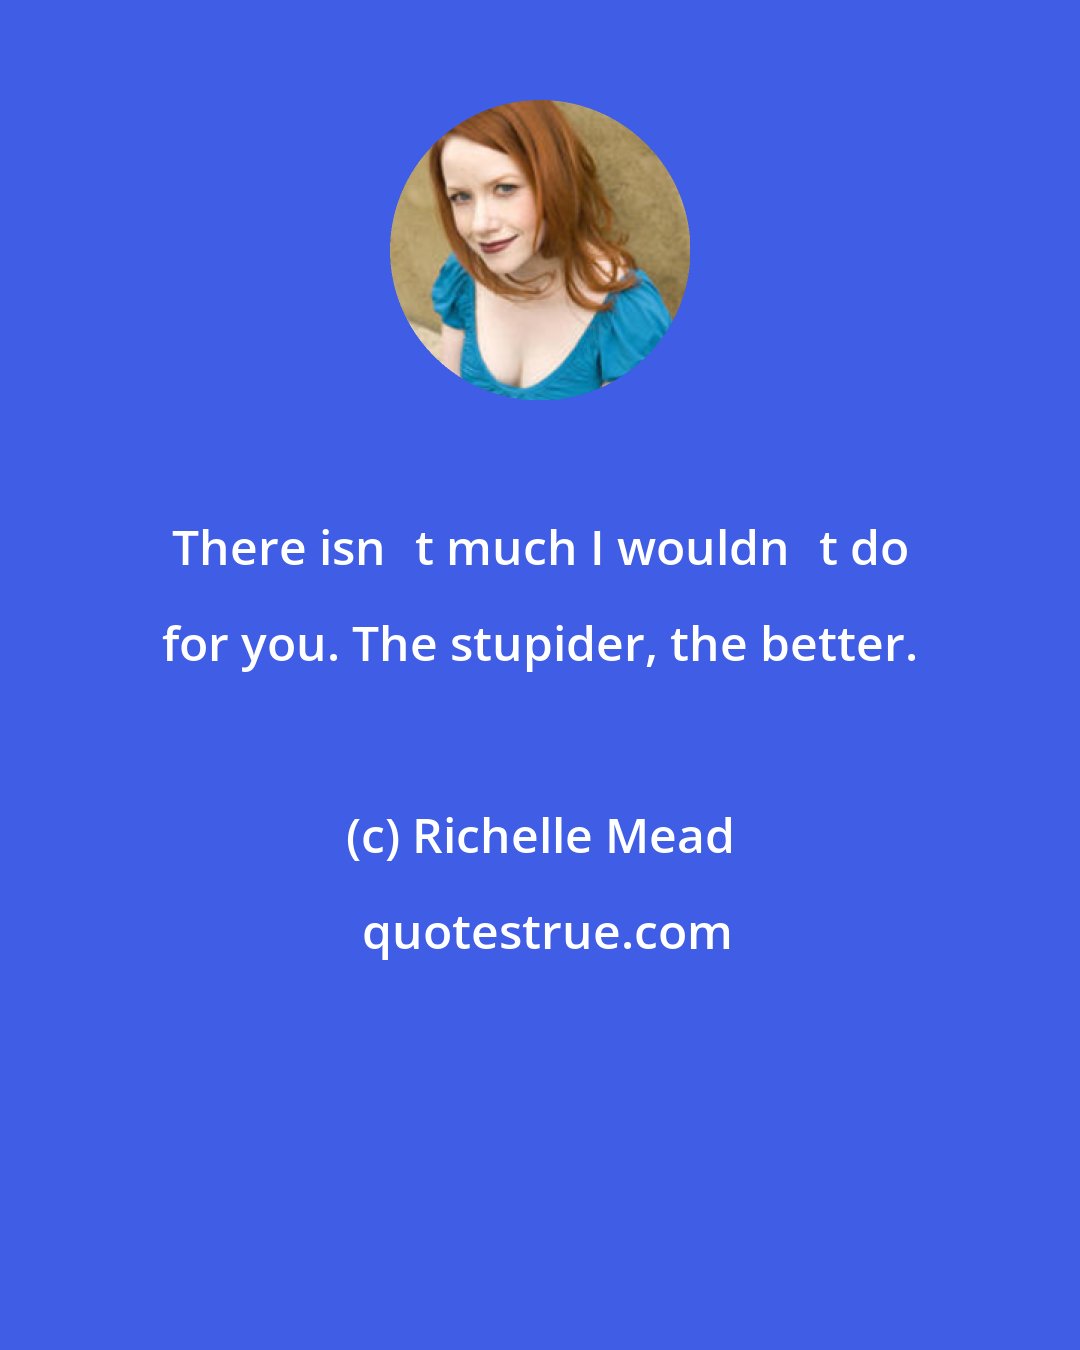 Richelle Mead: Тhere isnʹt much I wouldnʹt do for you. Тhe stupider, the better.